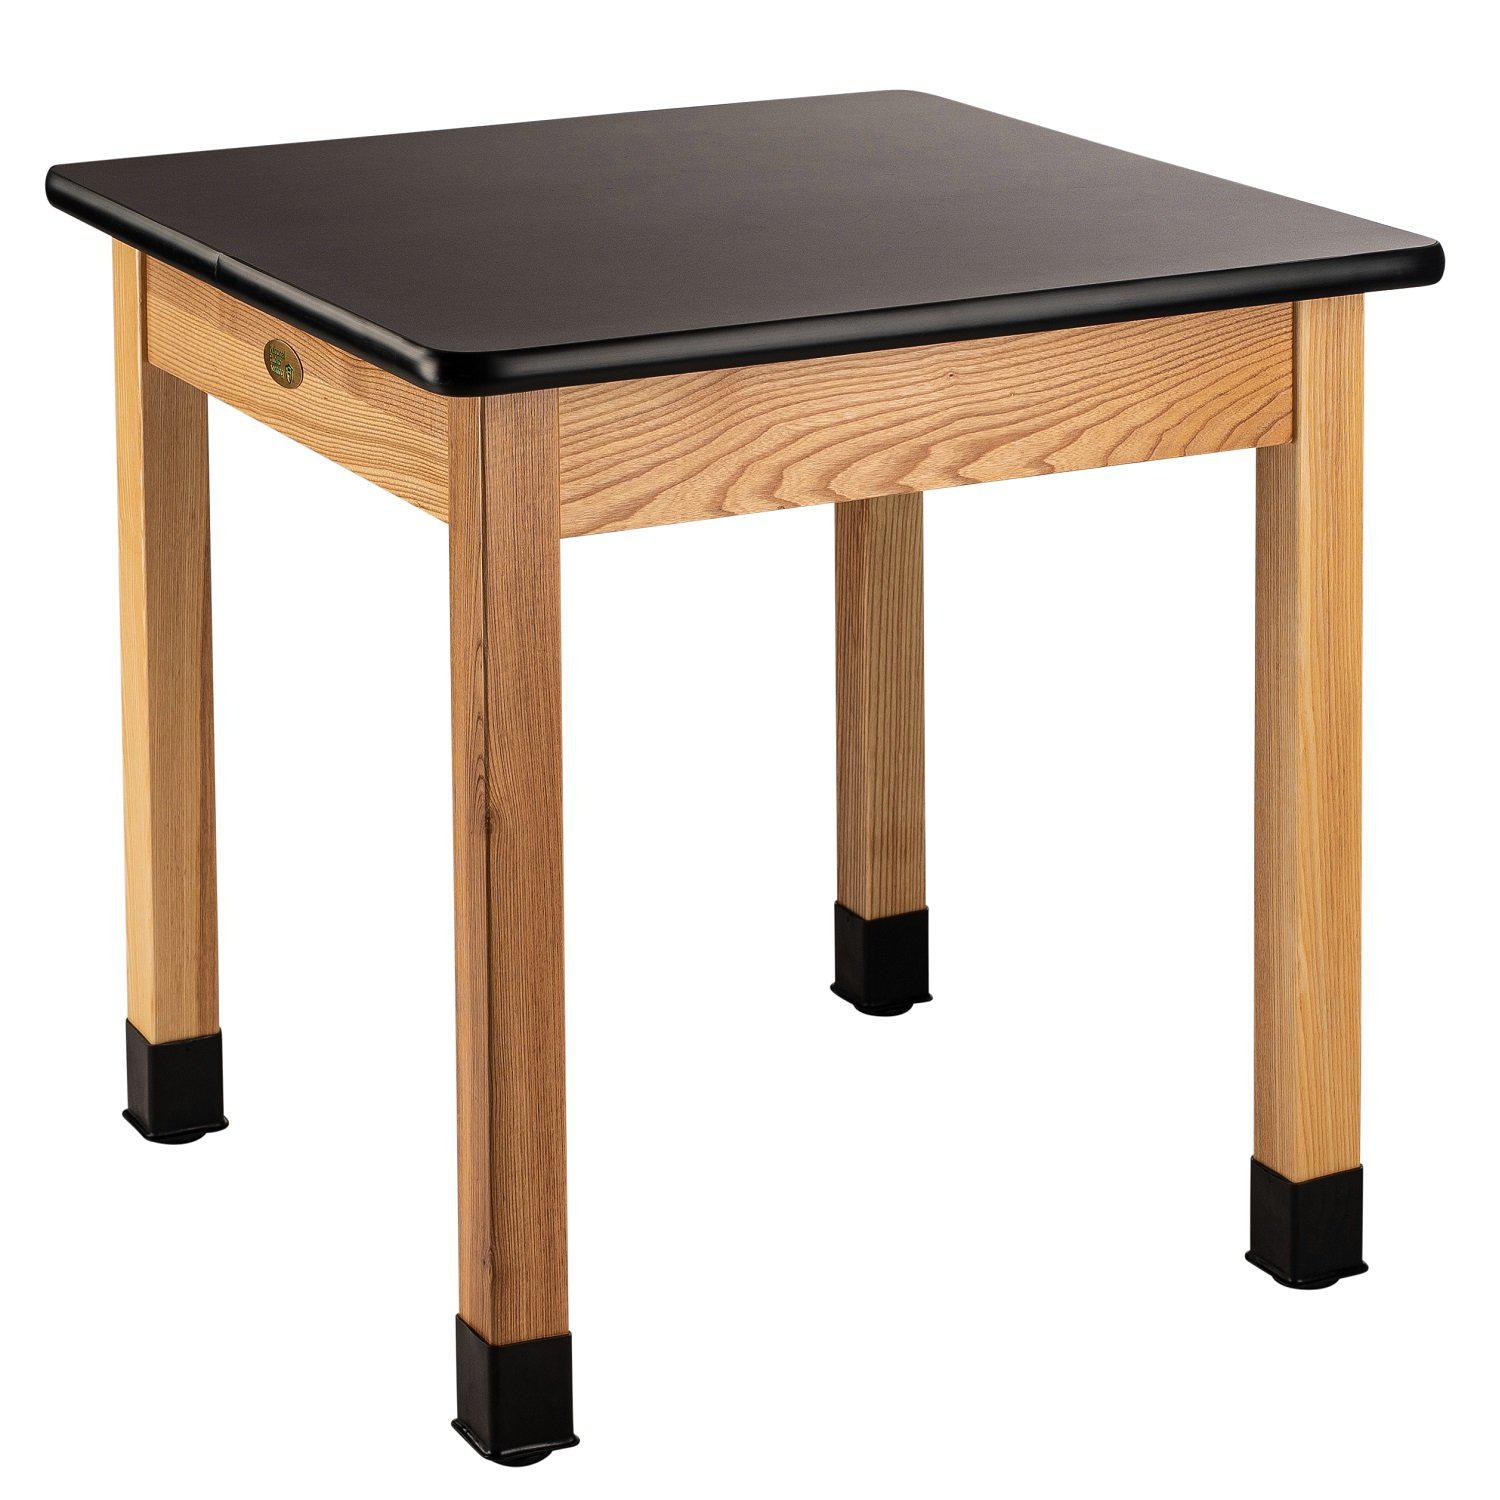 Personal Science Lab Table, Wood Frame, 30"x30"x36" H, Black High Pressure Laminate Top